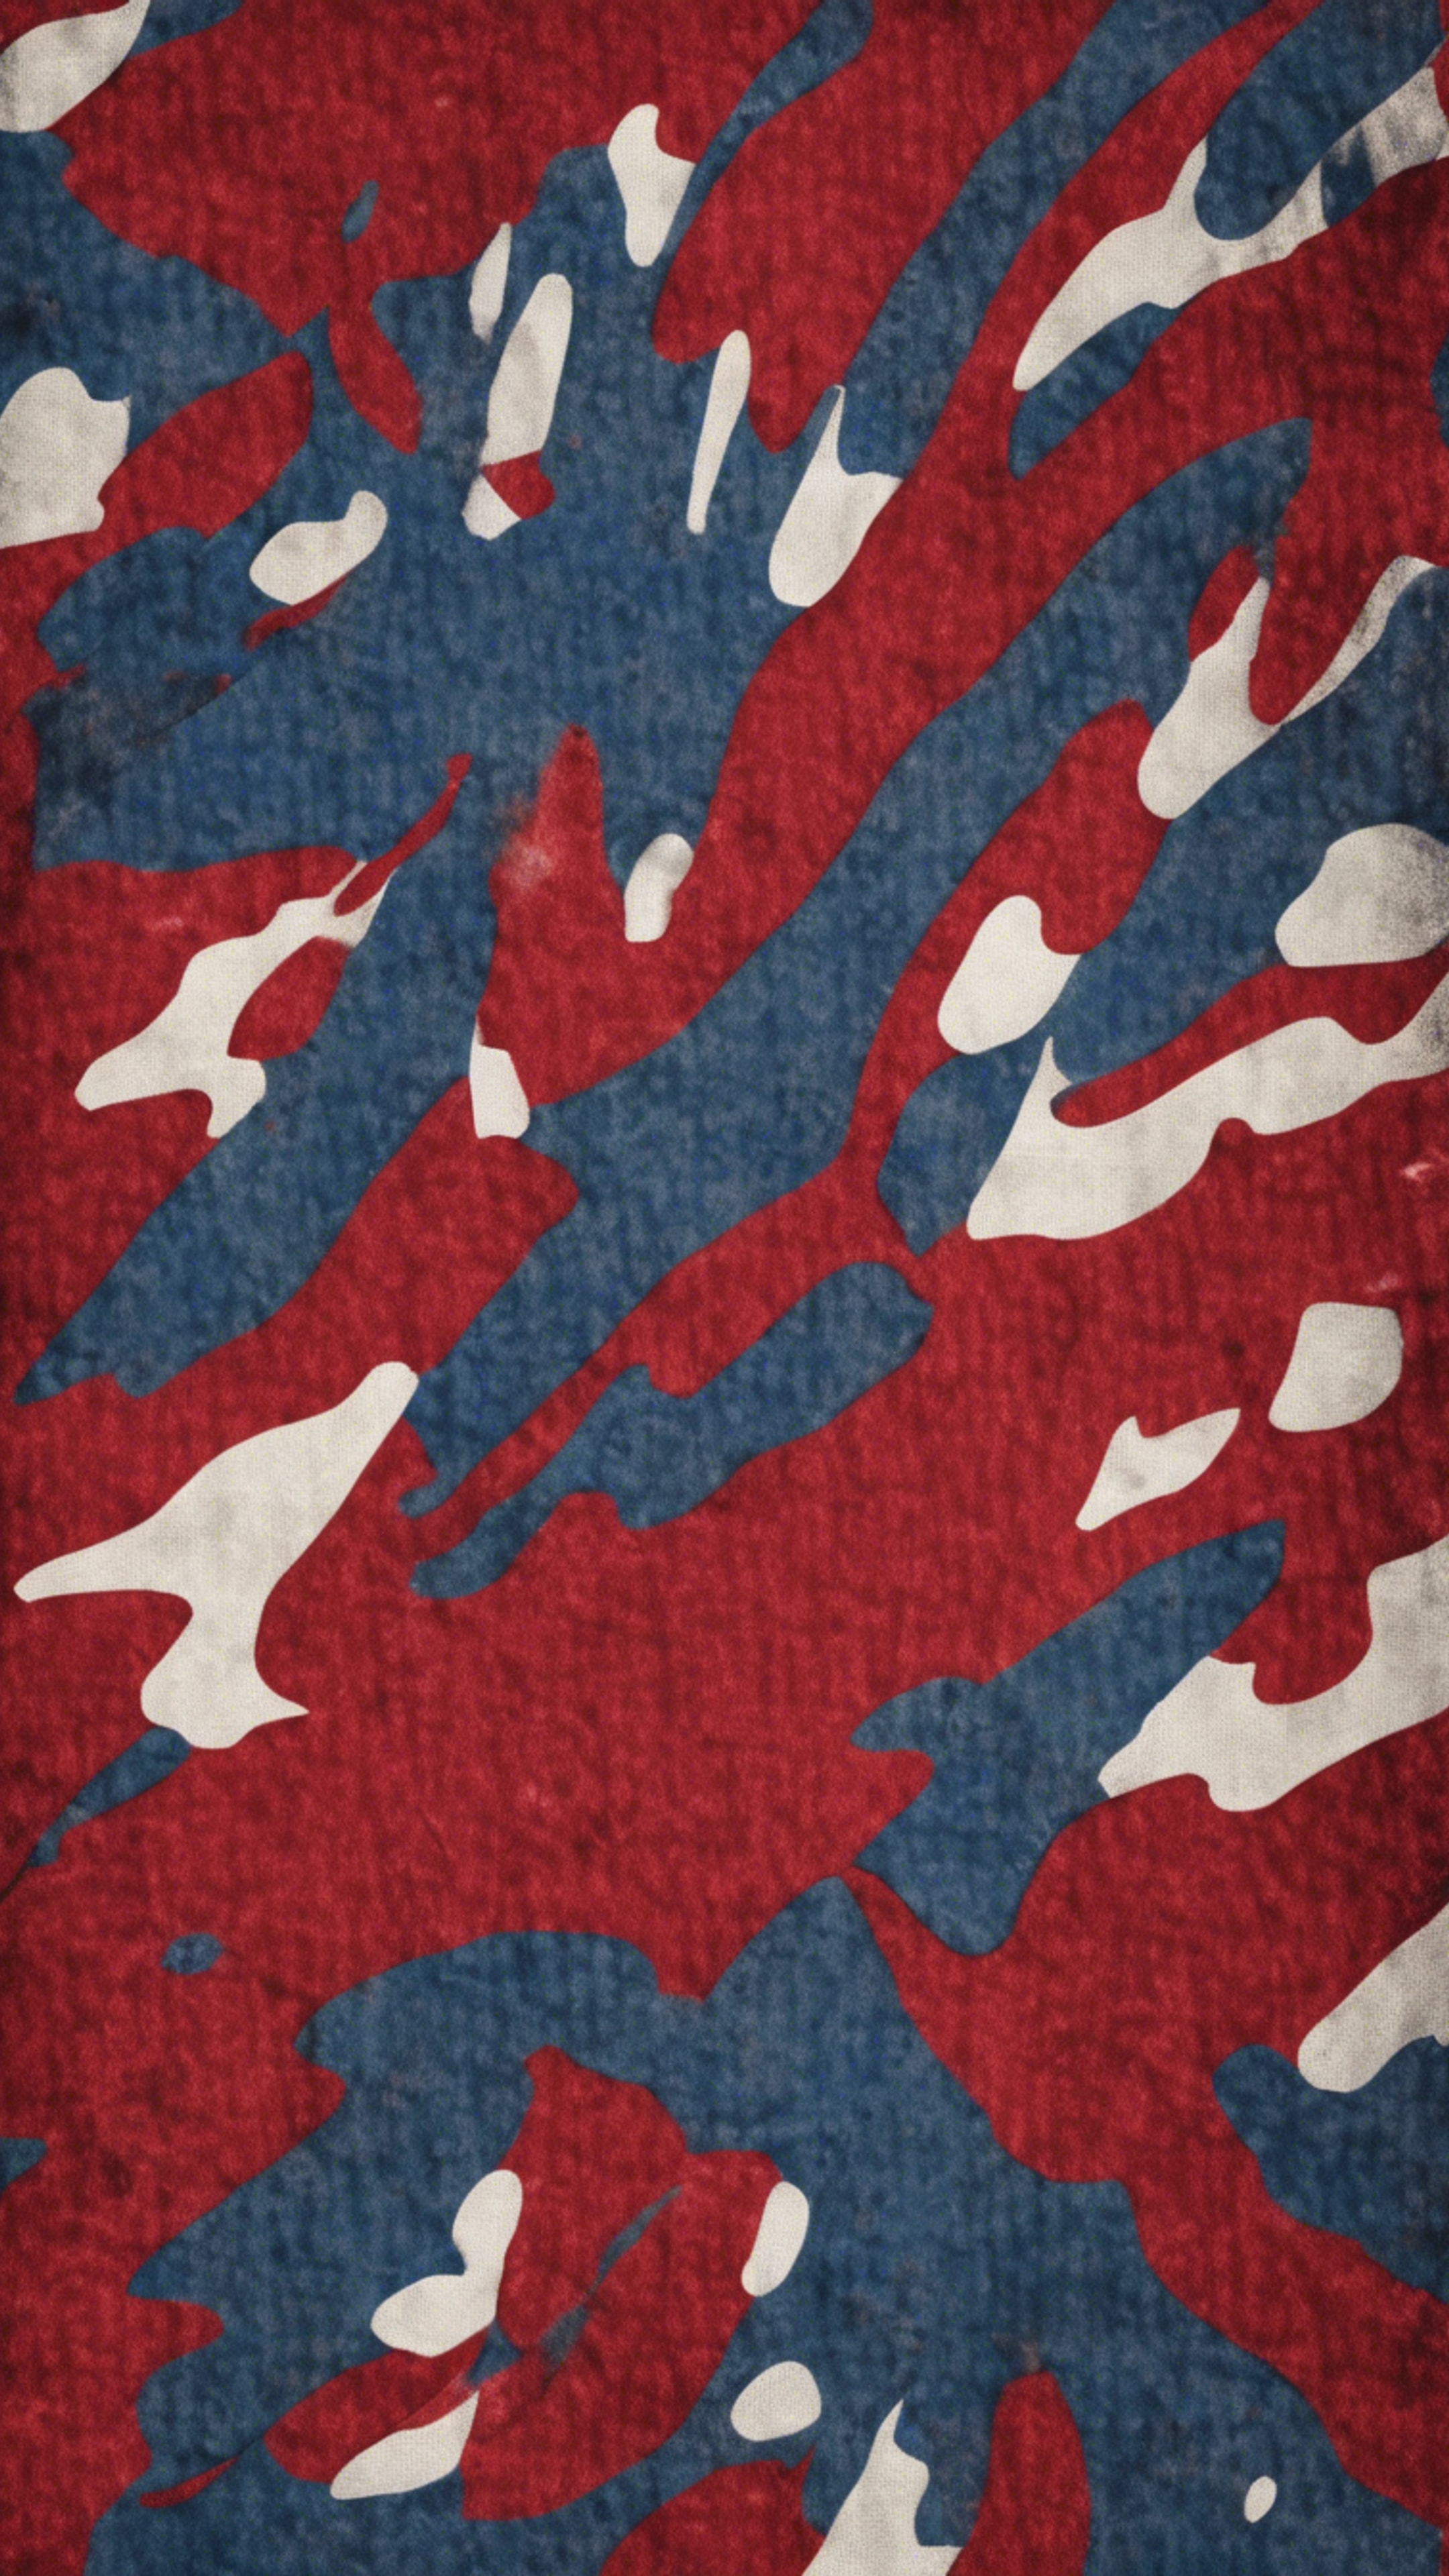 Red and blue camouflage pattern used in navy uniforms. Wallpaper[01ccfb252ca748fab57f]